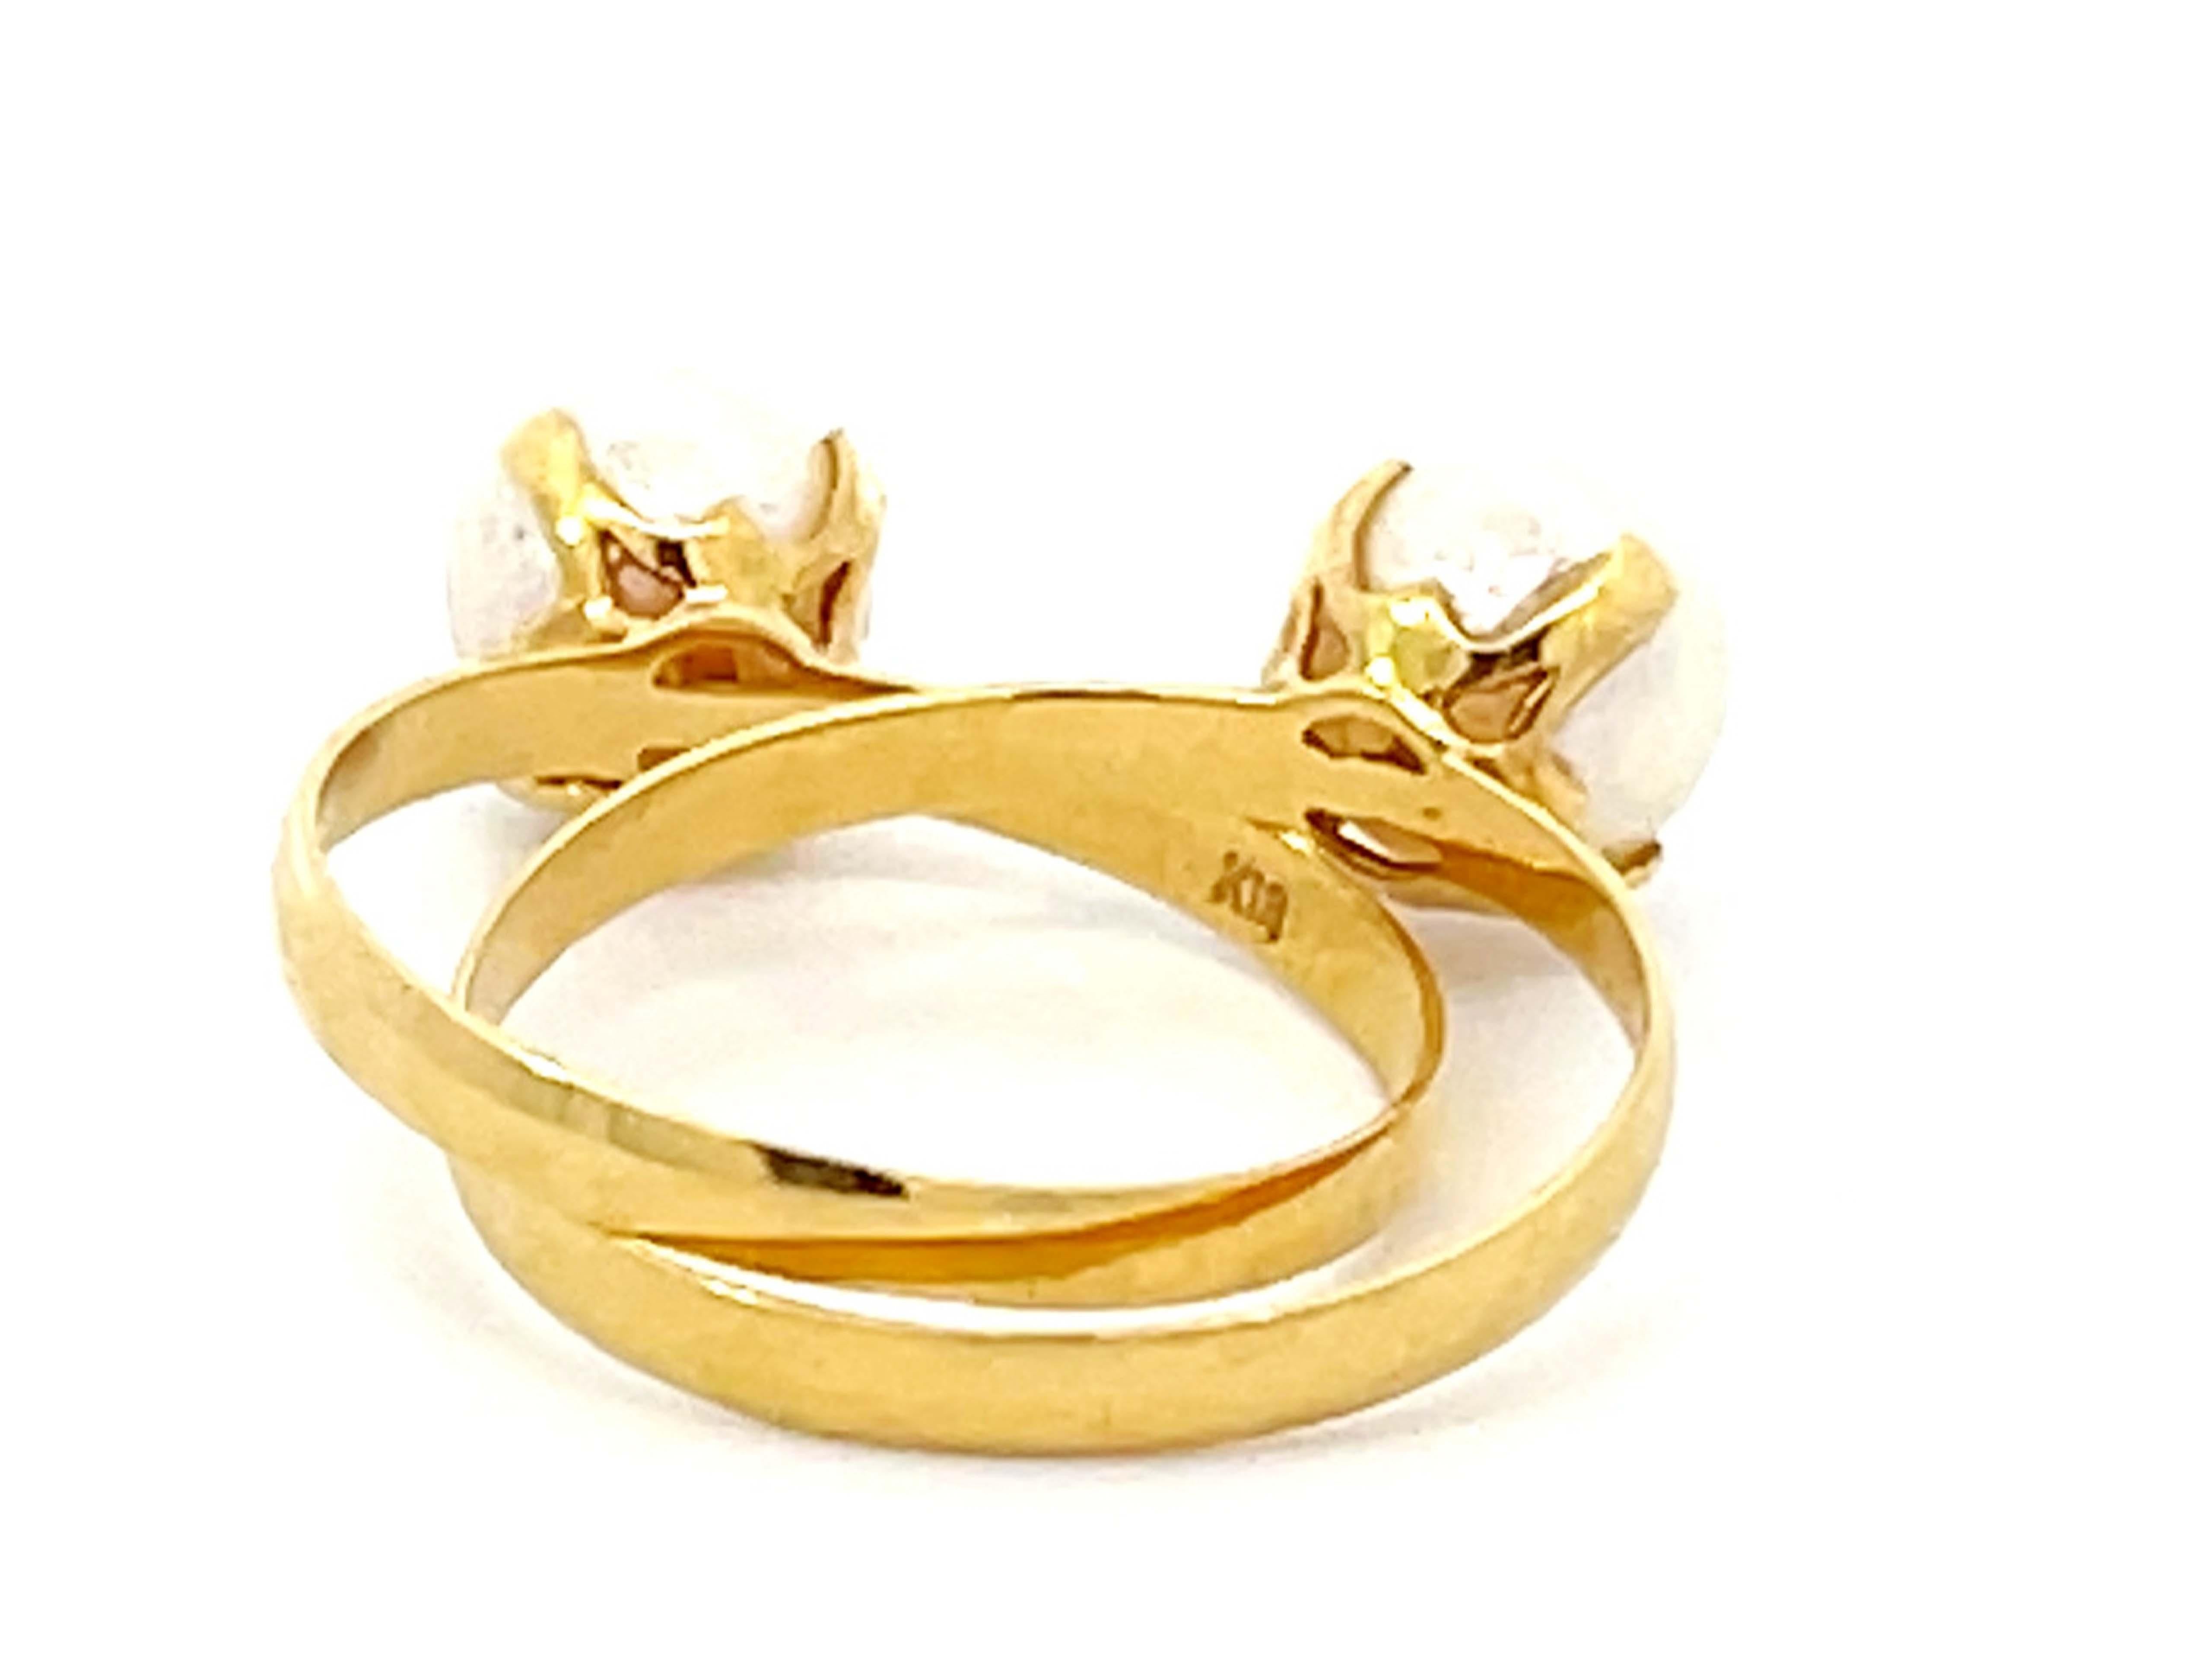 Interconnected Double Pearl Ring 18k Yellow Gold In Excellent Condition For Sale In Honolulu, HI